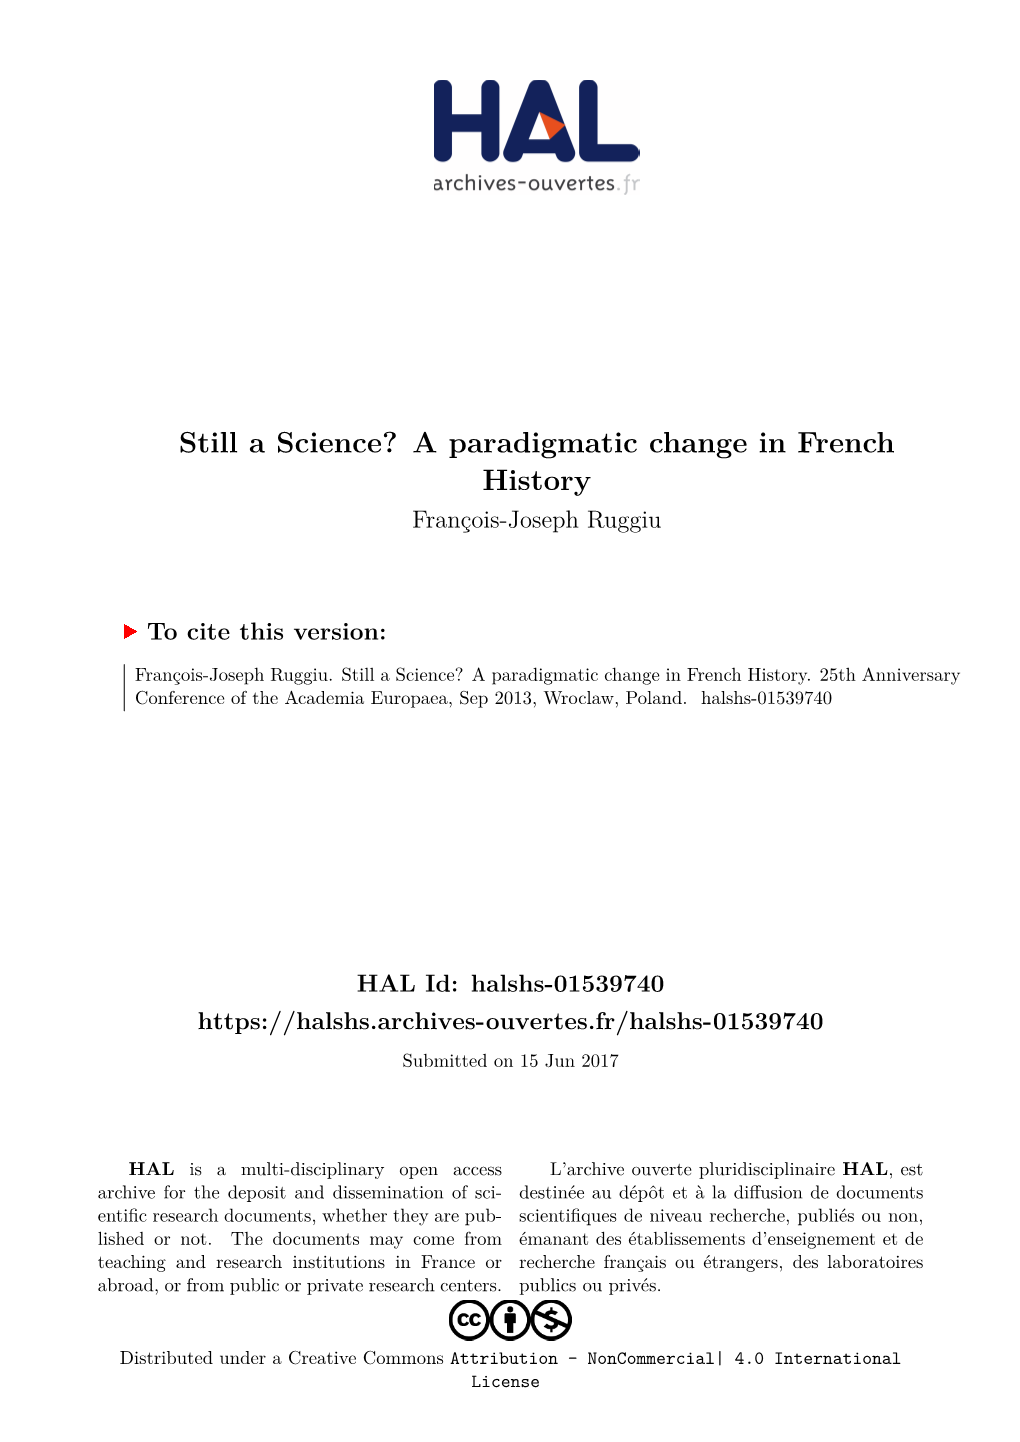 Still a Science? a Paradigmatic Change in French History François-Joseph Ruggiu